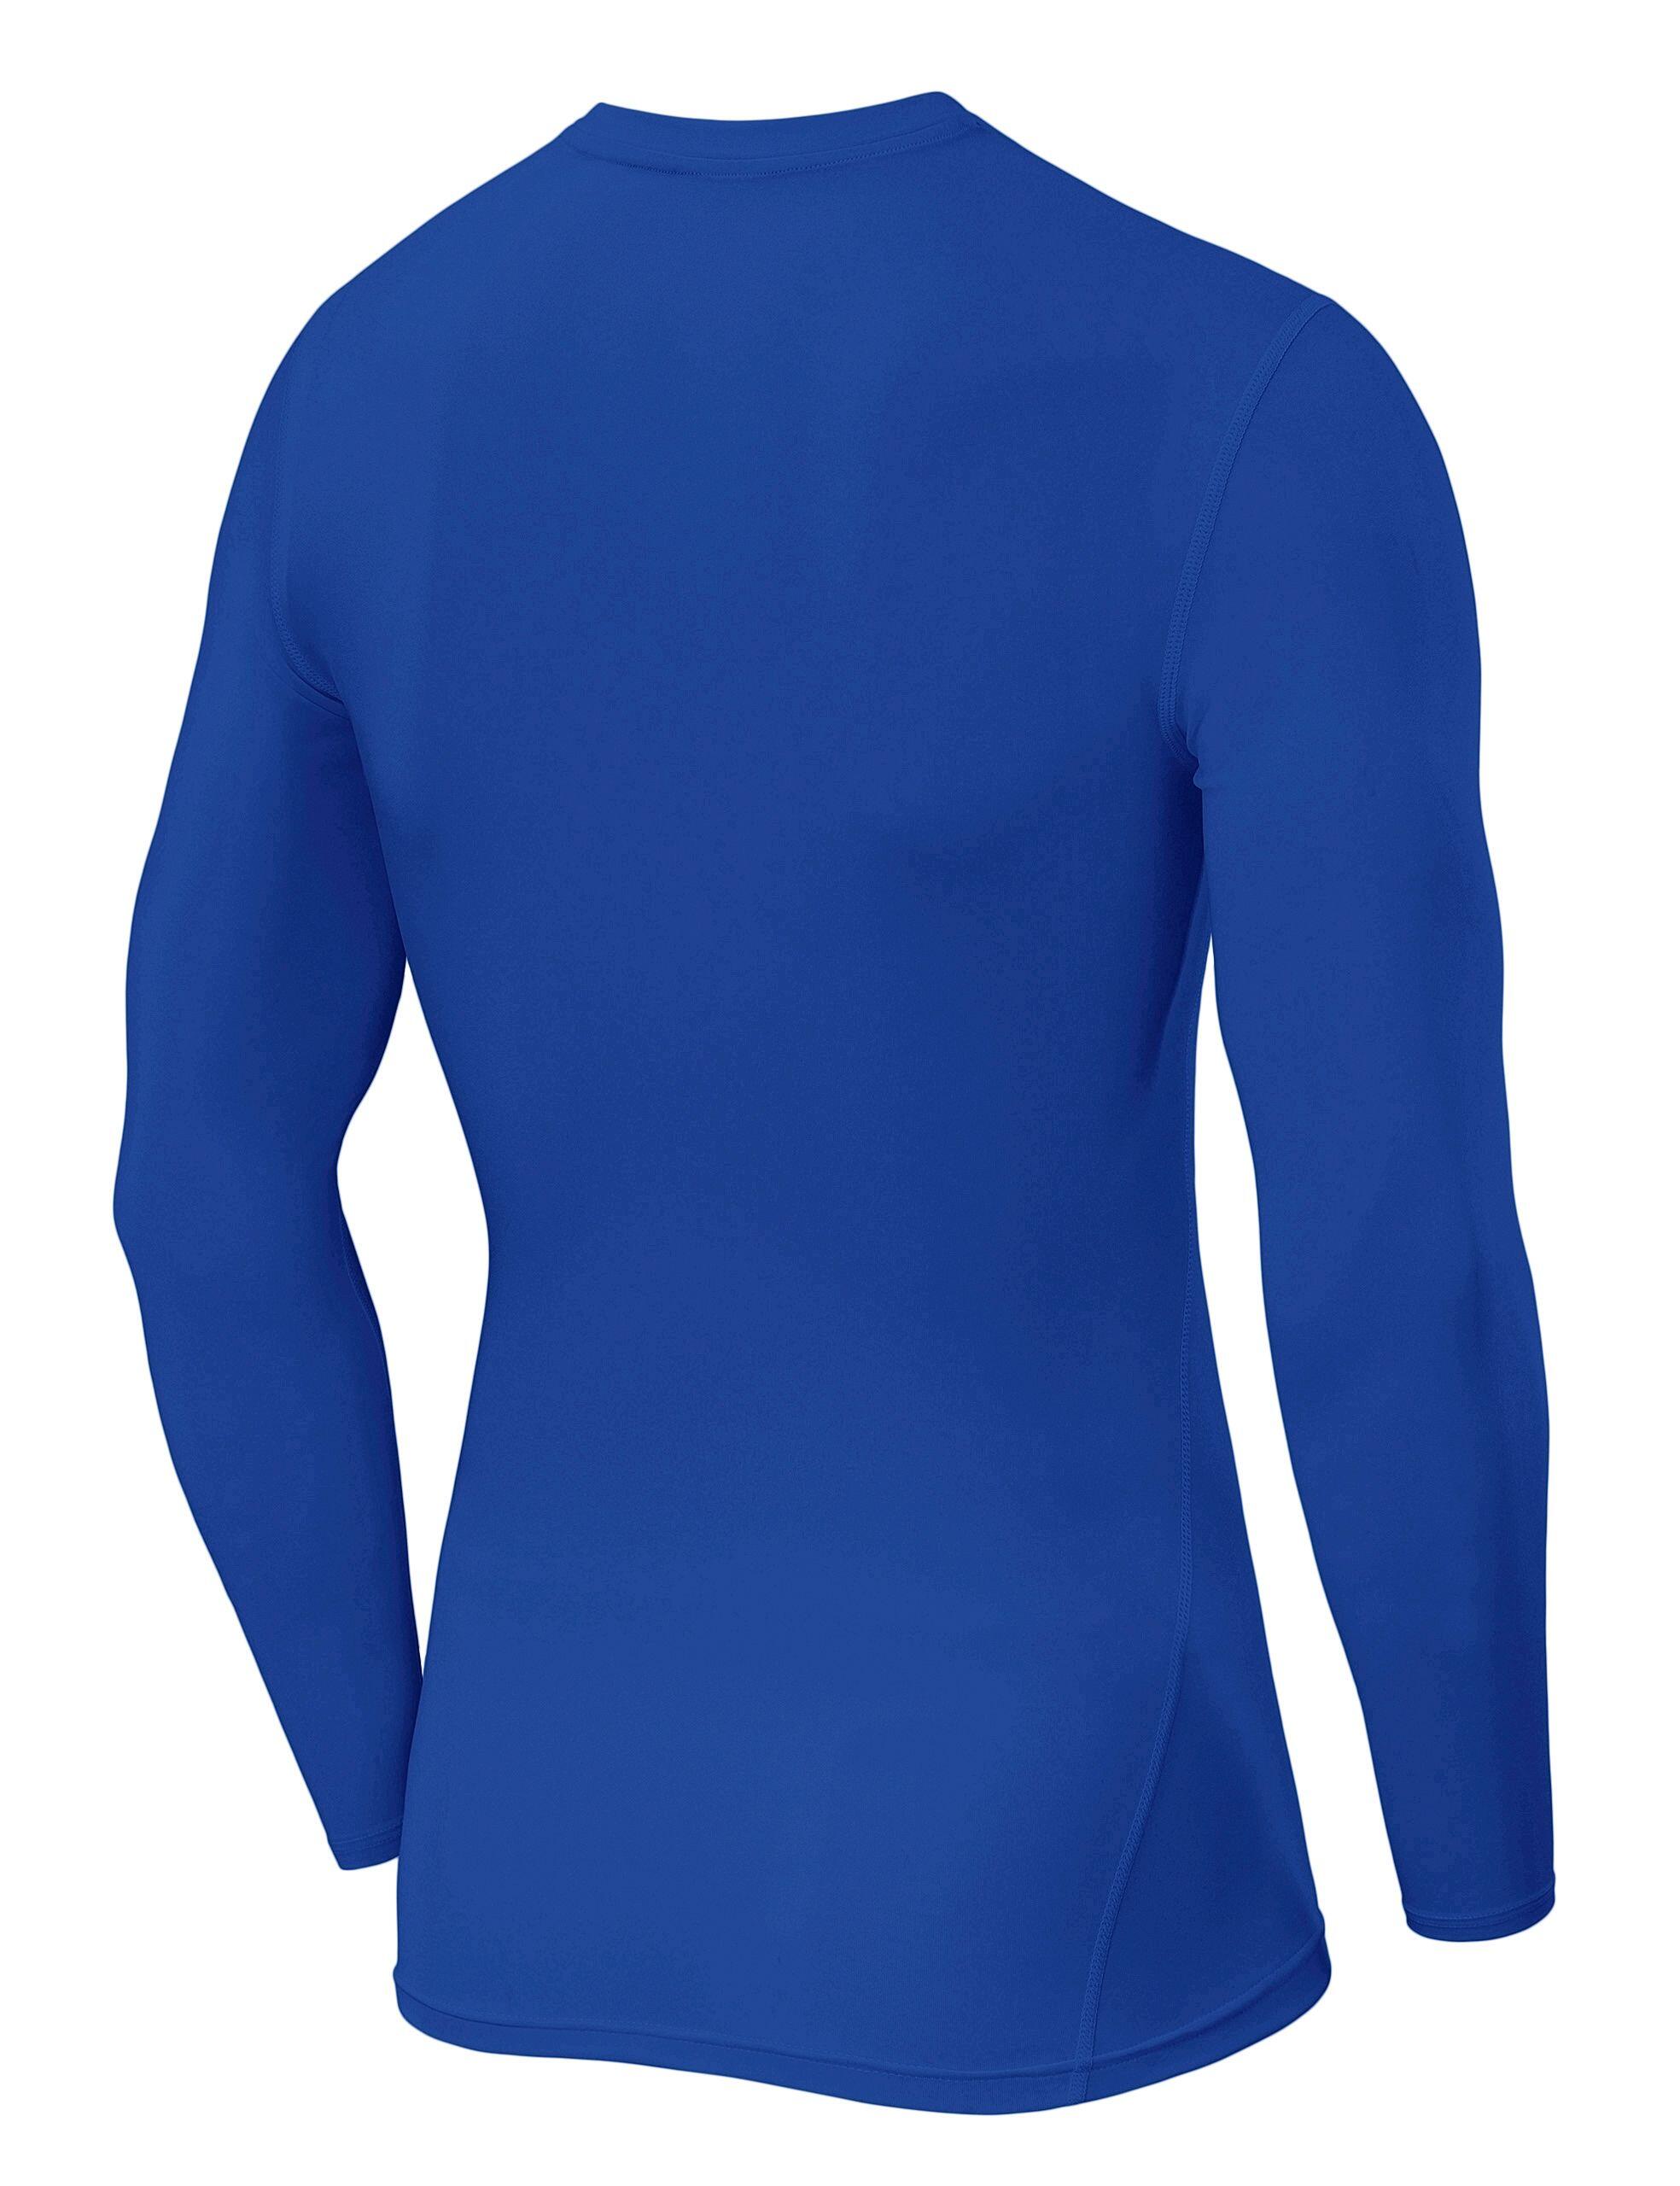 Men's Power Base Layer Compression Long Sleeve Top - Dazzling Blue 3/5